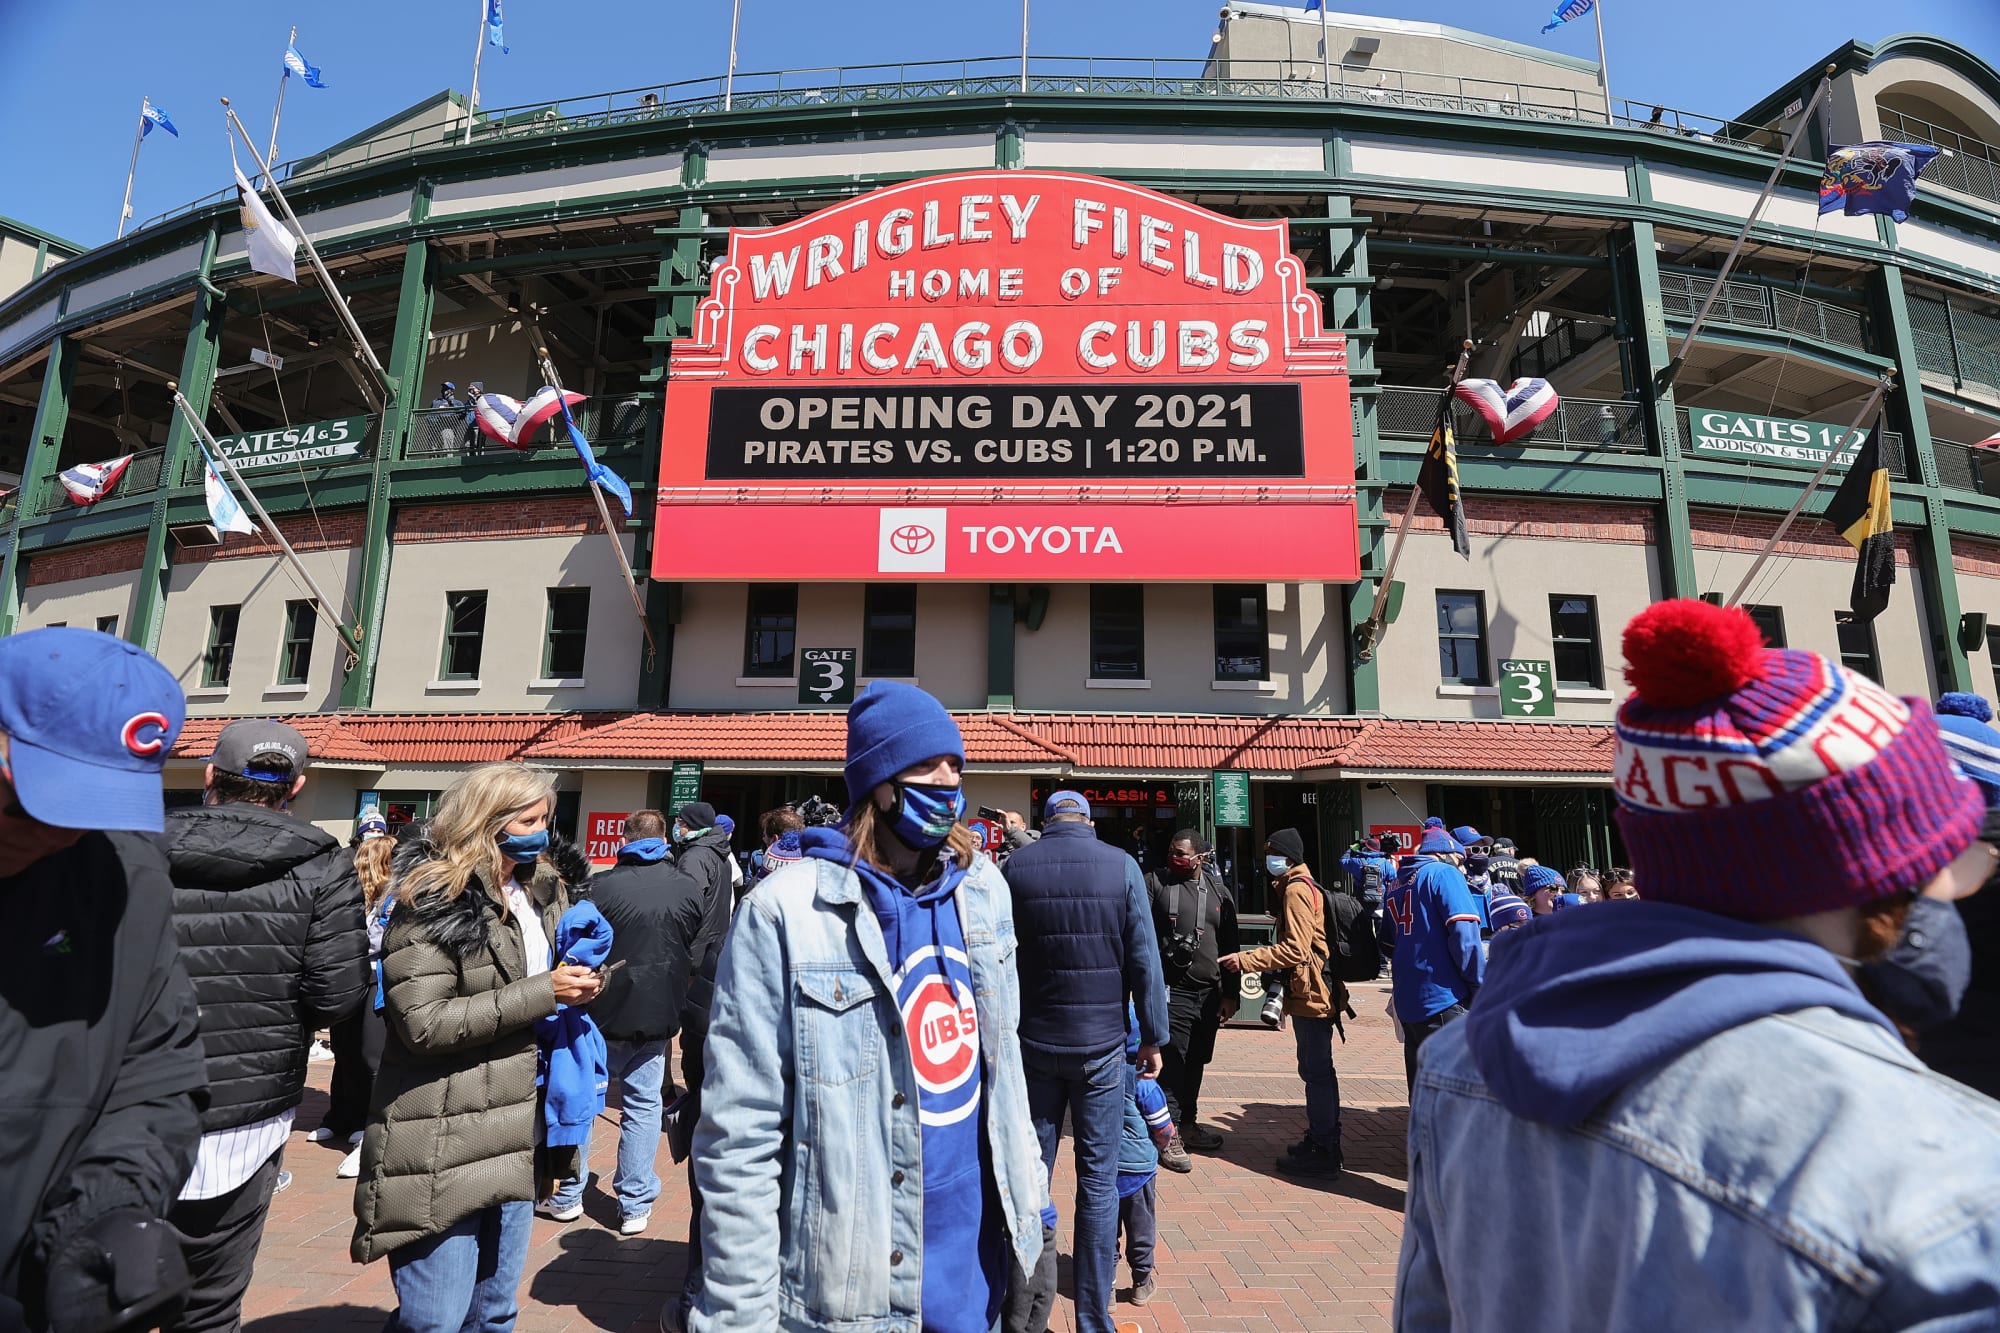 Chicago Cubs: This National League rival is really going all in - Da Windy City